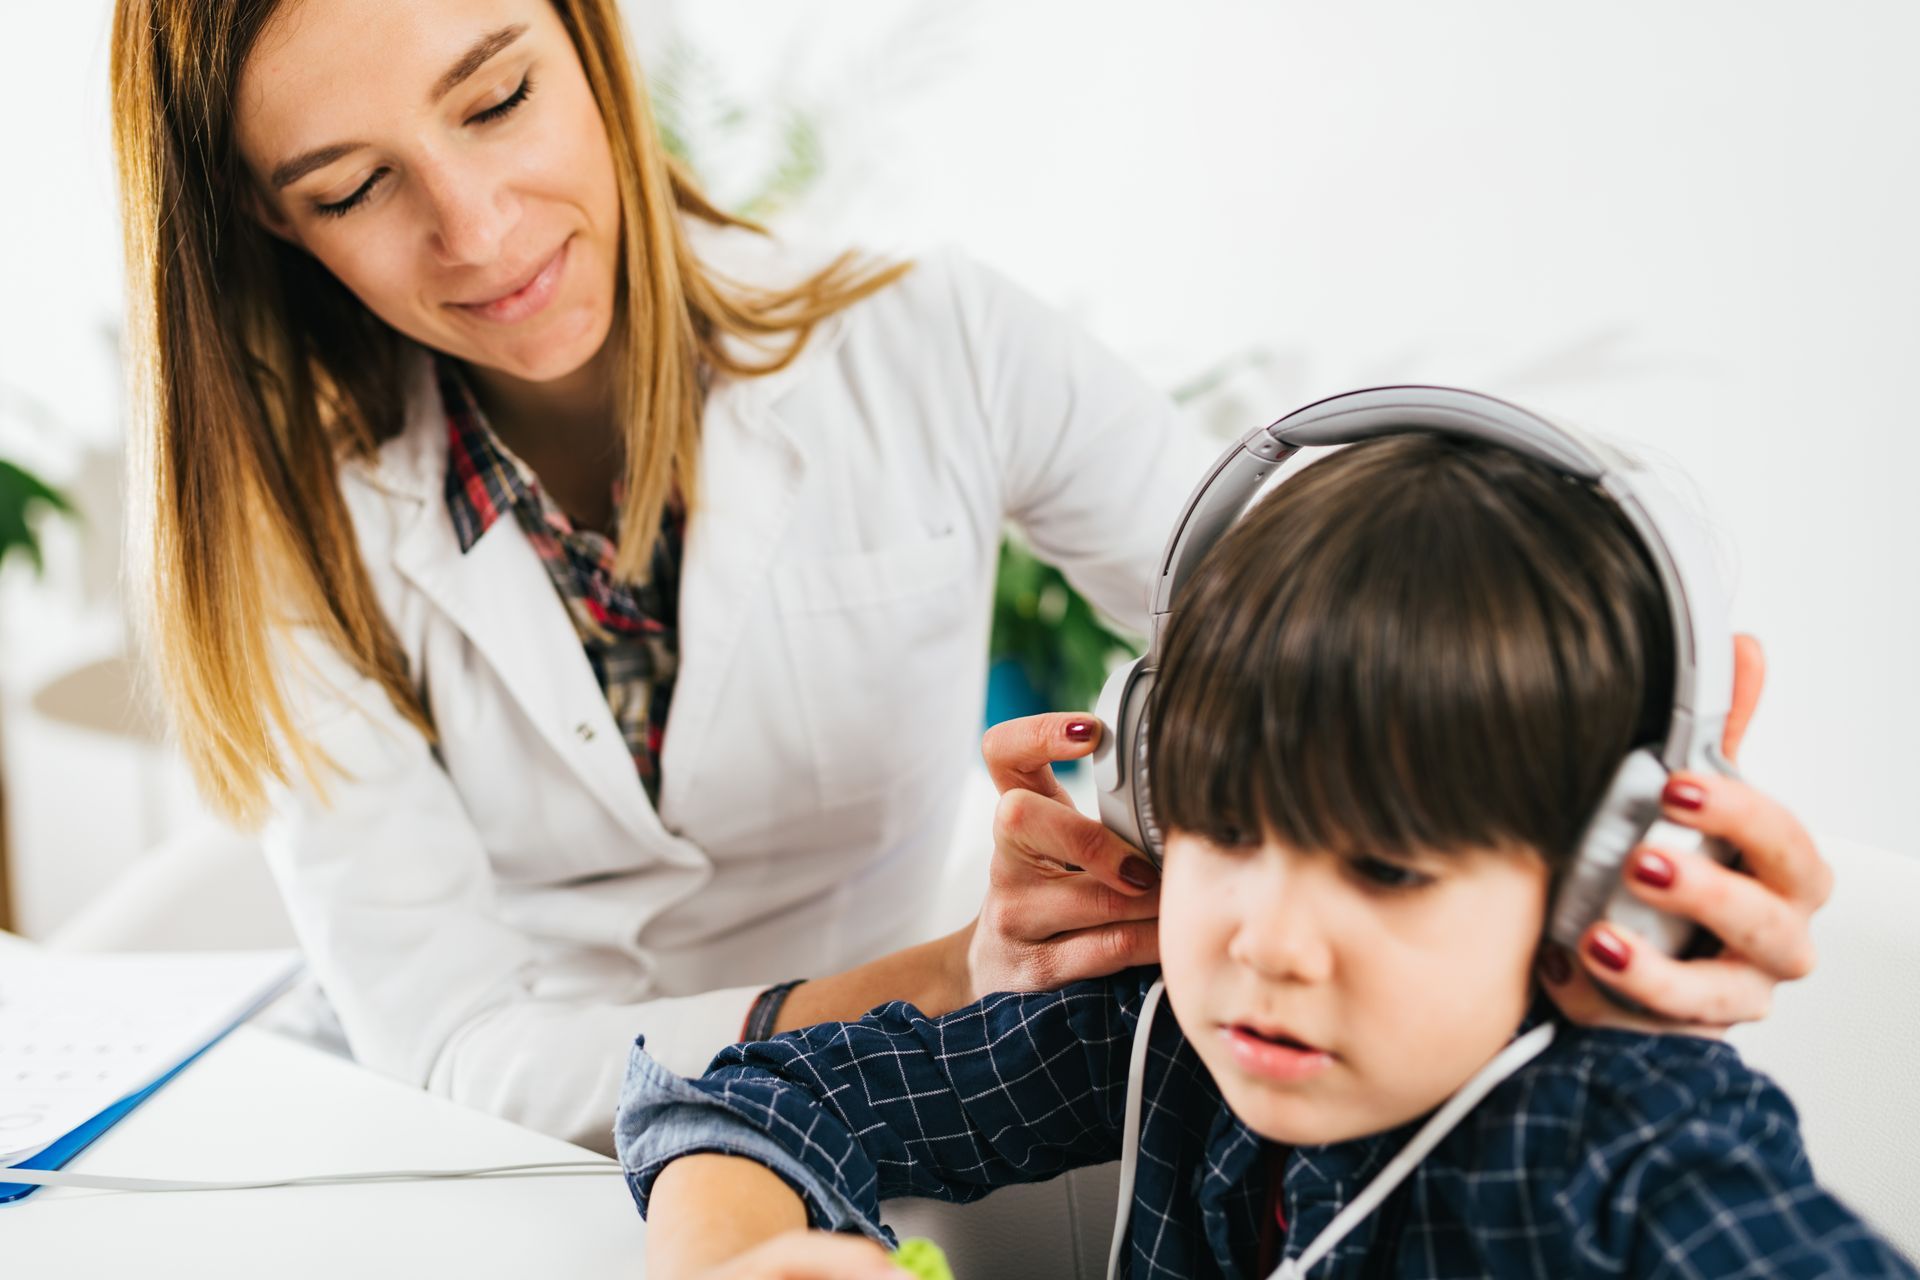 A woman is putting headphones on a young boy 's ears.